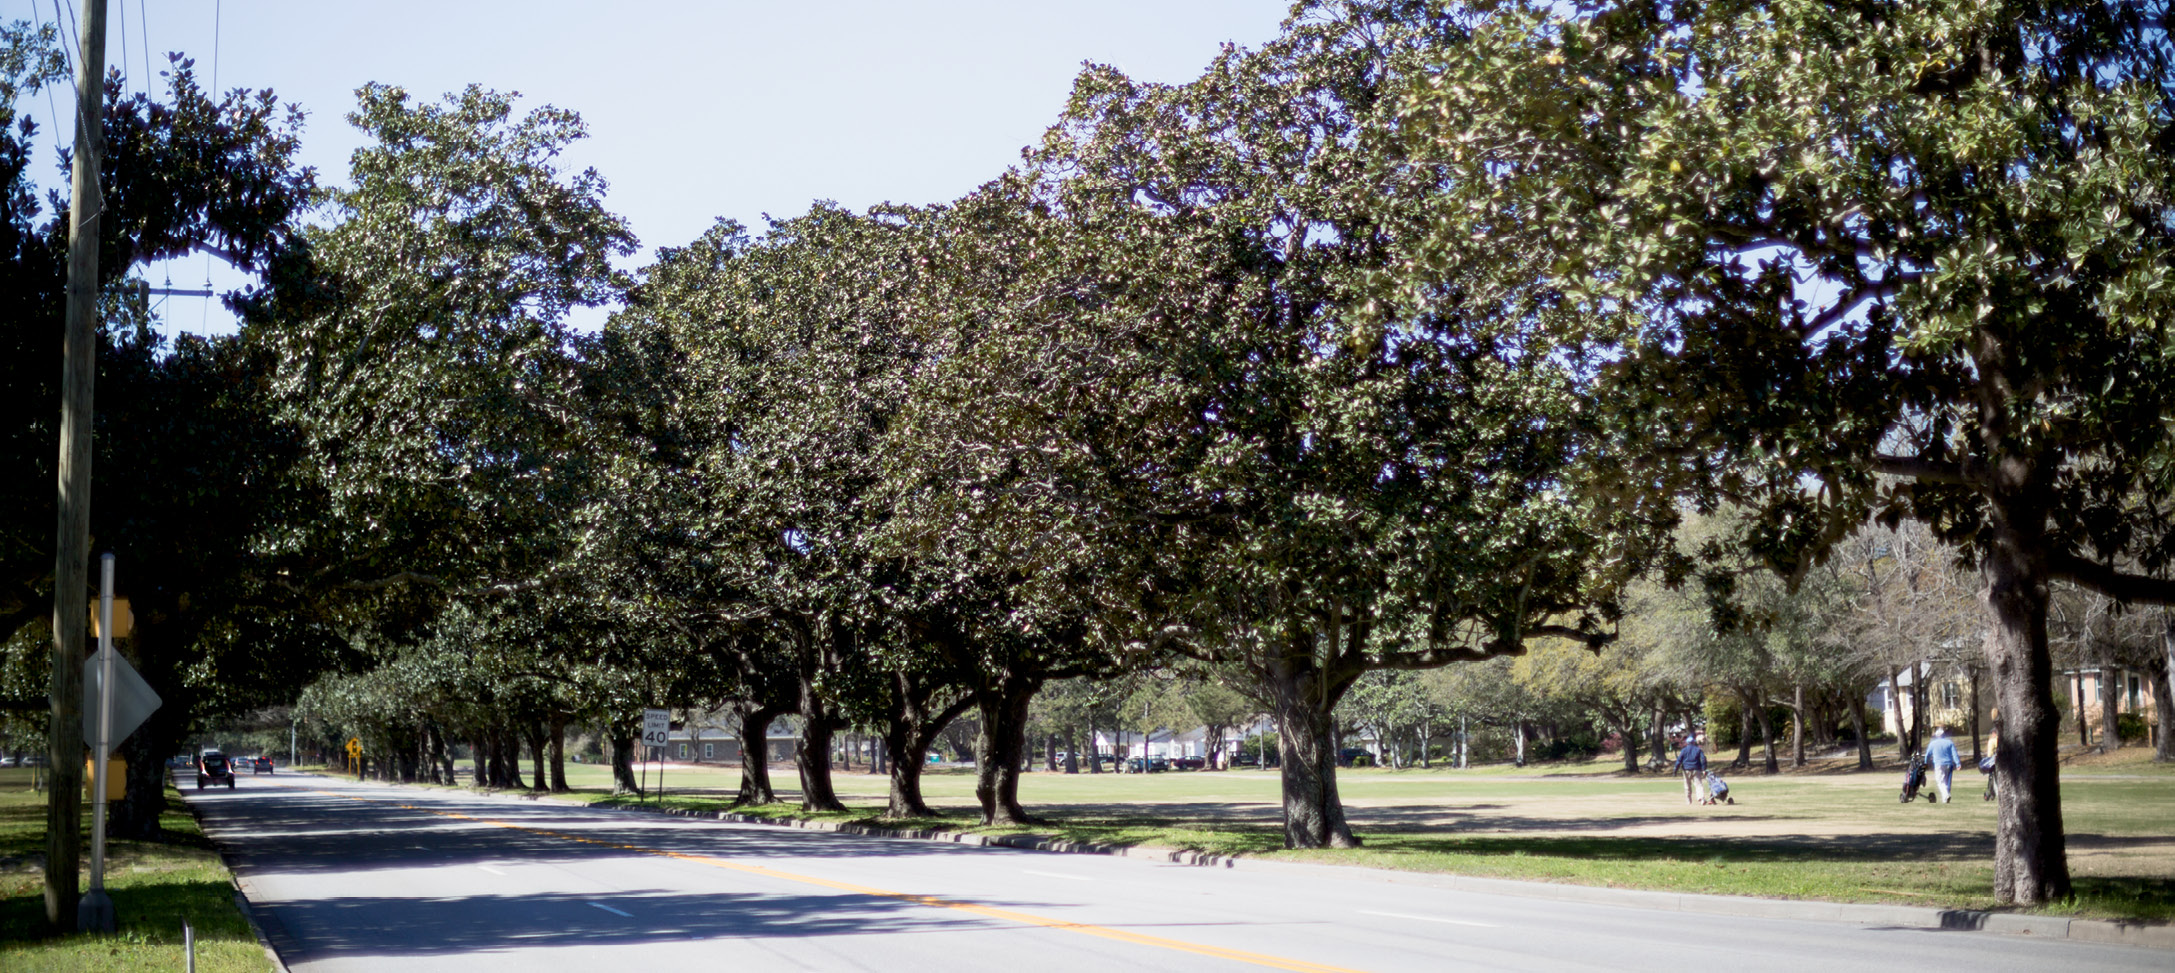 In 1935, Victor had 200 magnolias planted along Maybank Highway “to assure an avenue of loveliness for all who pass that way.”